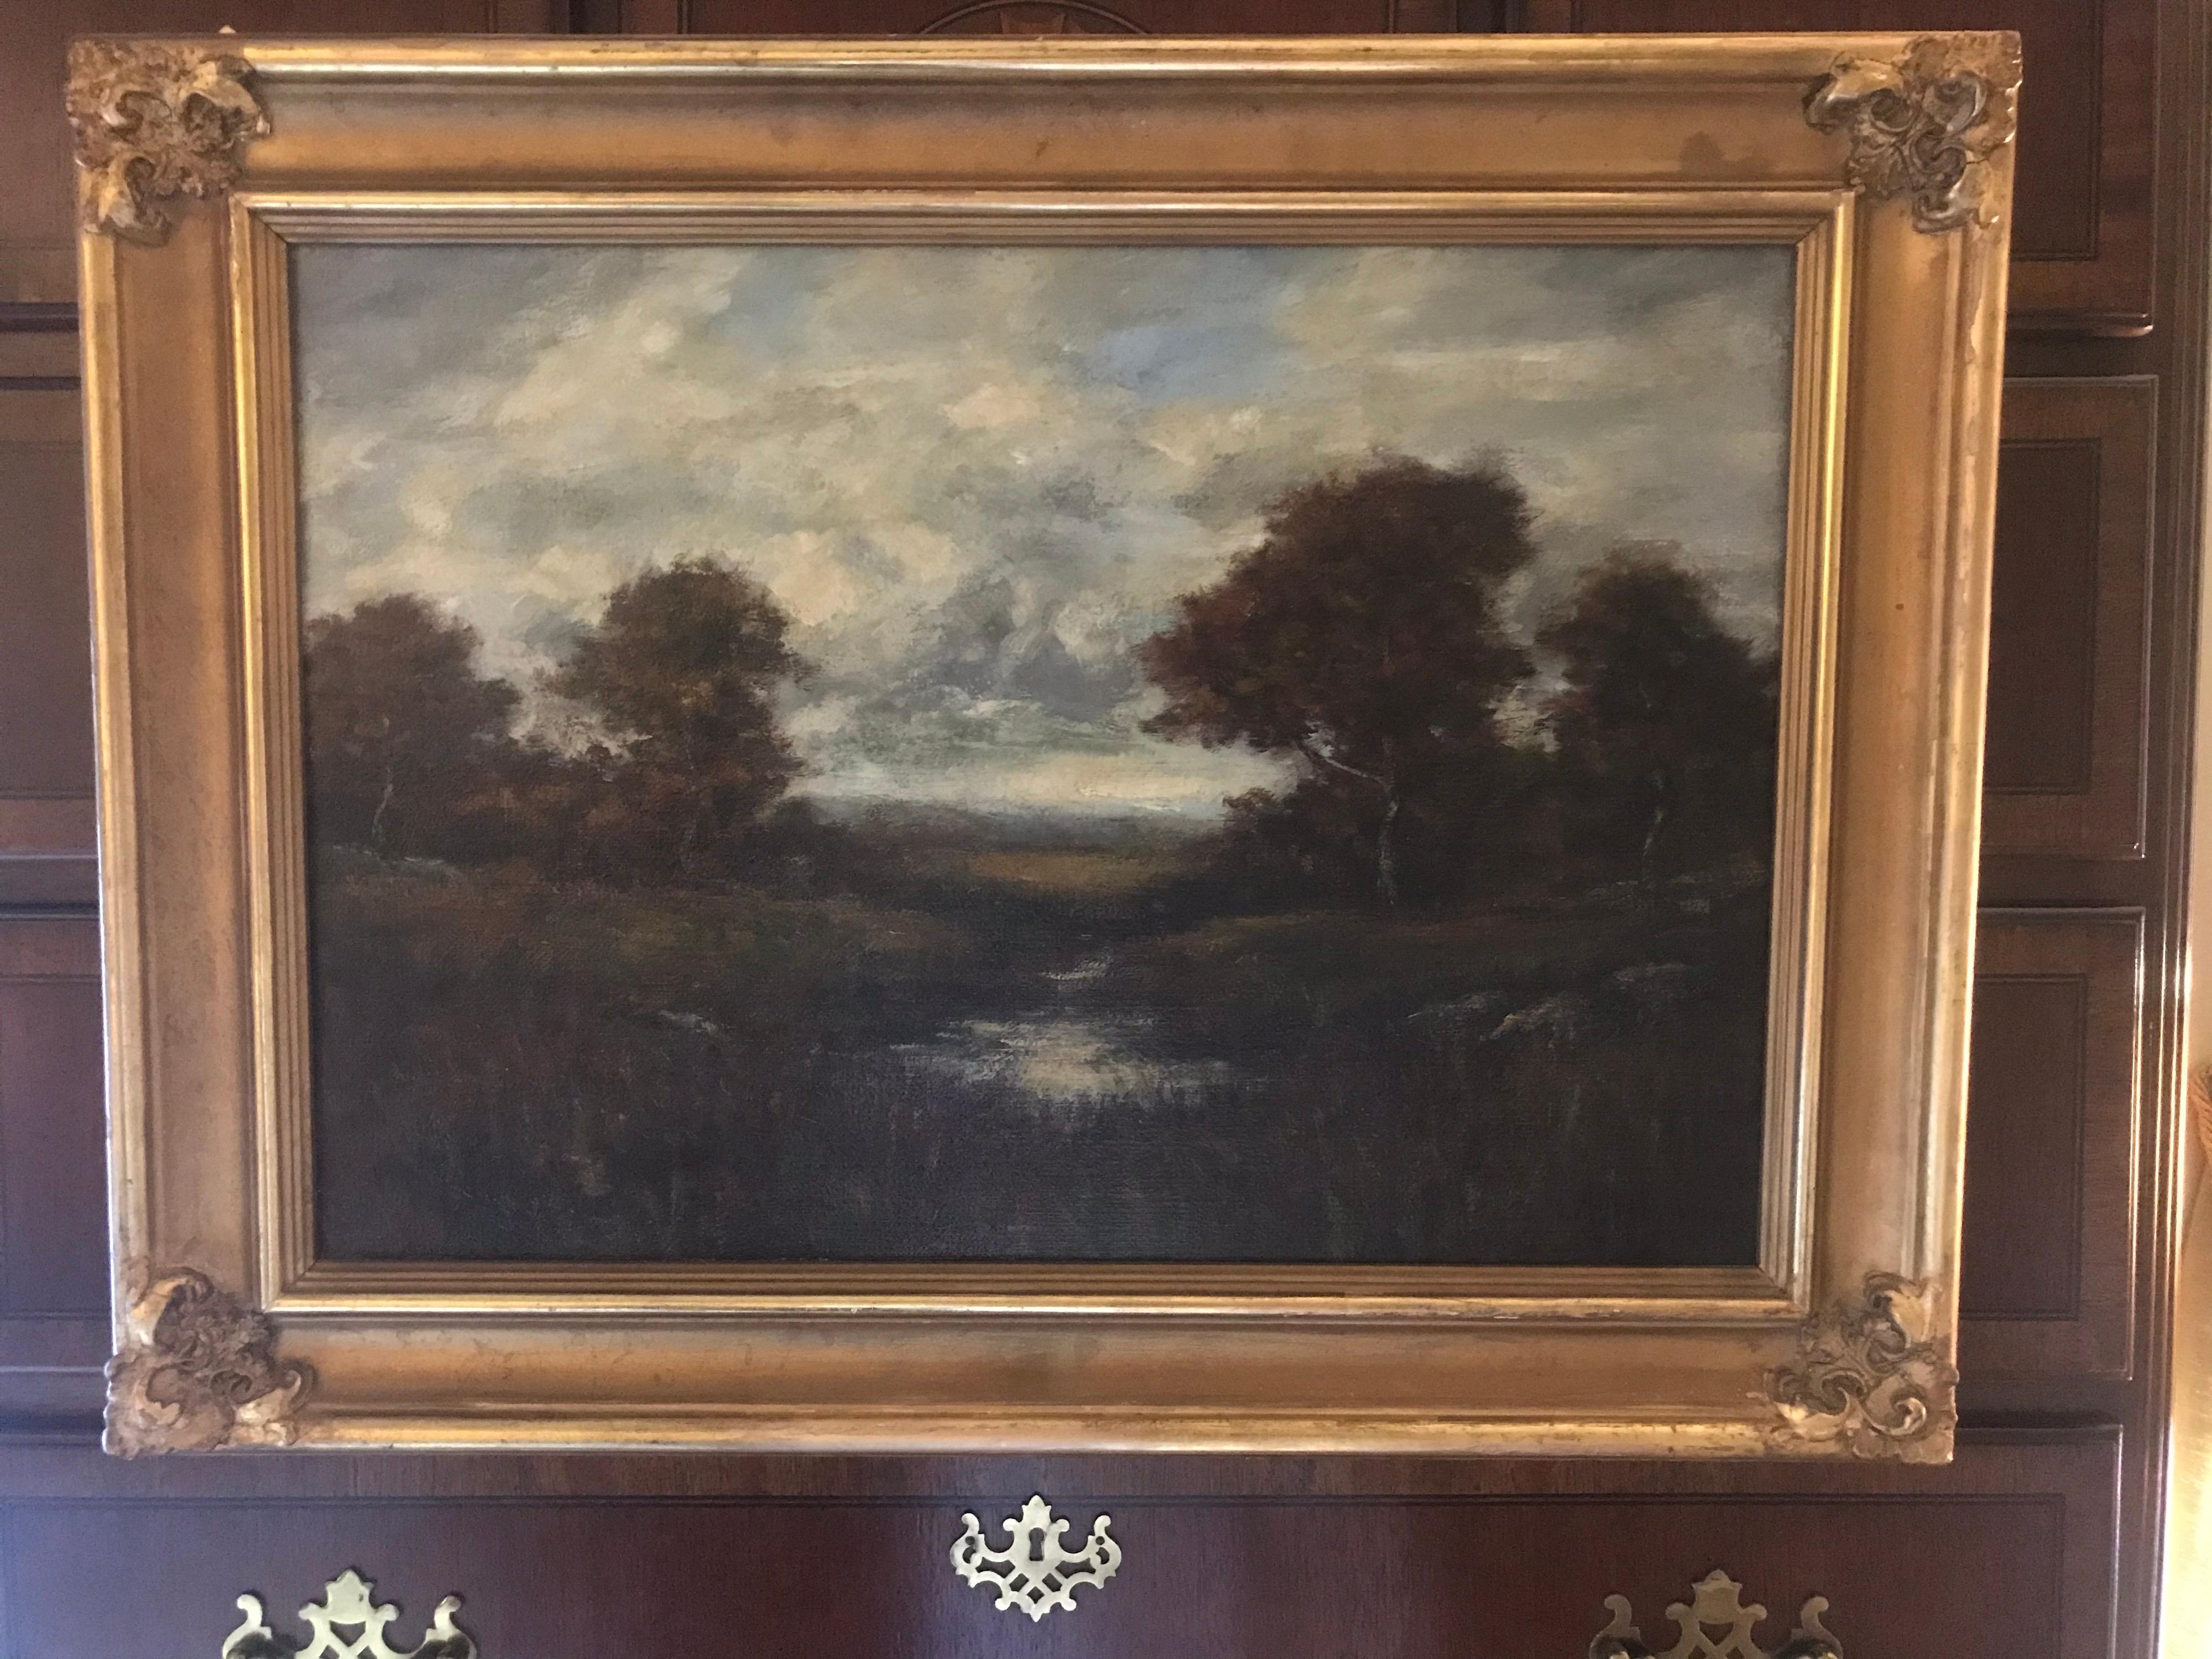 An oil on canvas in antique gilt wood frame by Alexander Helwig Wyant. This painting has been re-stretched with a laminated back for stability. Signed on the lower right.

Alexander Helwig Wyant (January 11, 1836 – November 29, 1892) was an